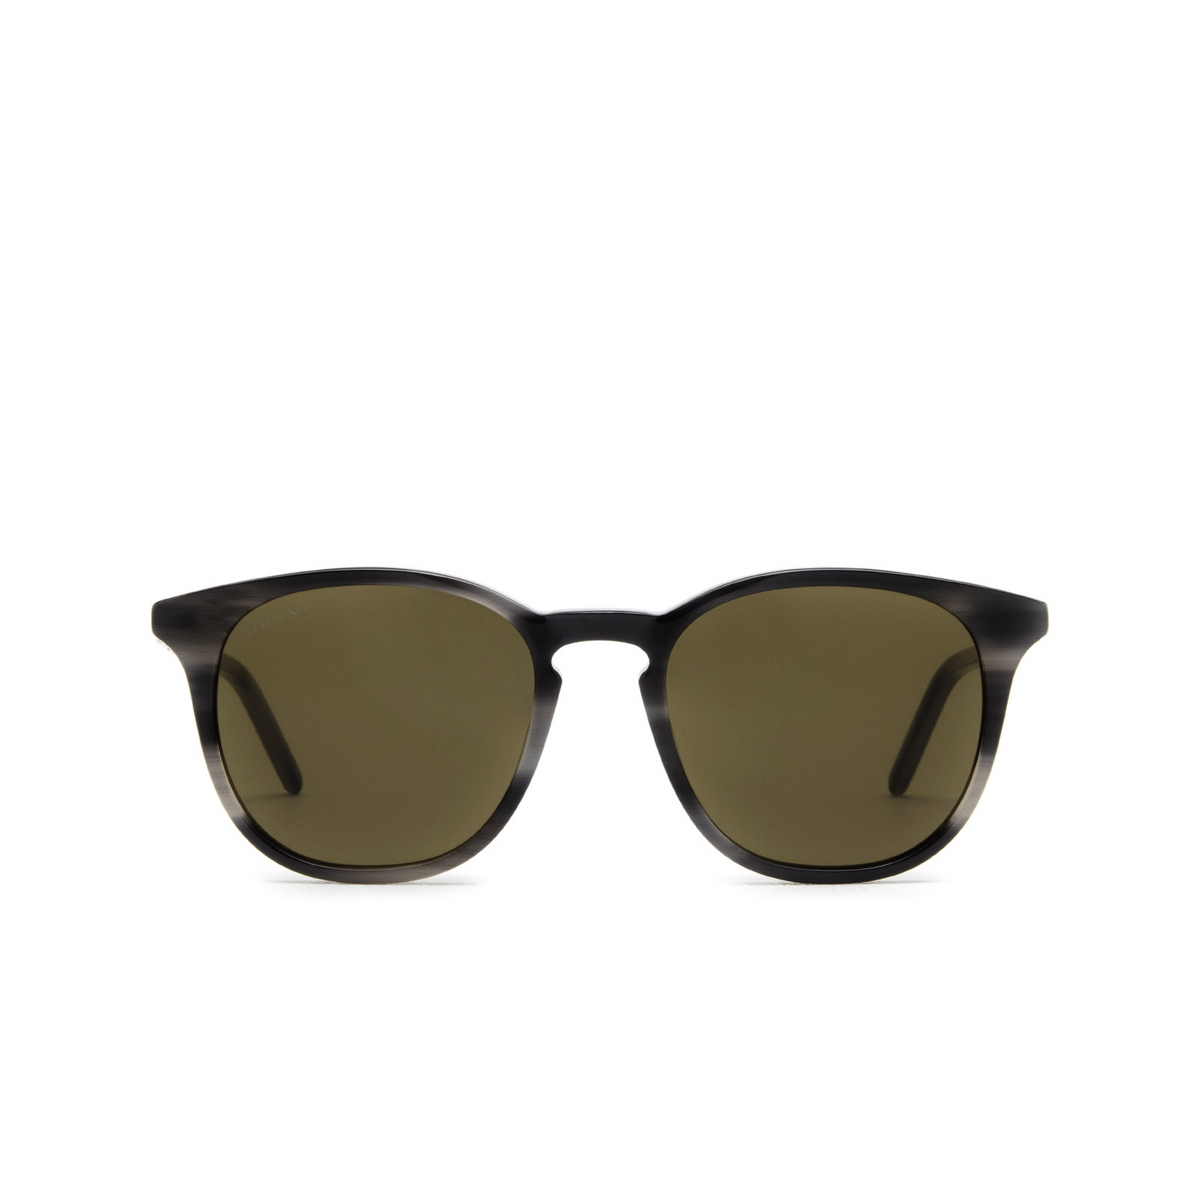 Gucci® Round Sunglasses: GG1157S color Grey 004 - front view.